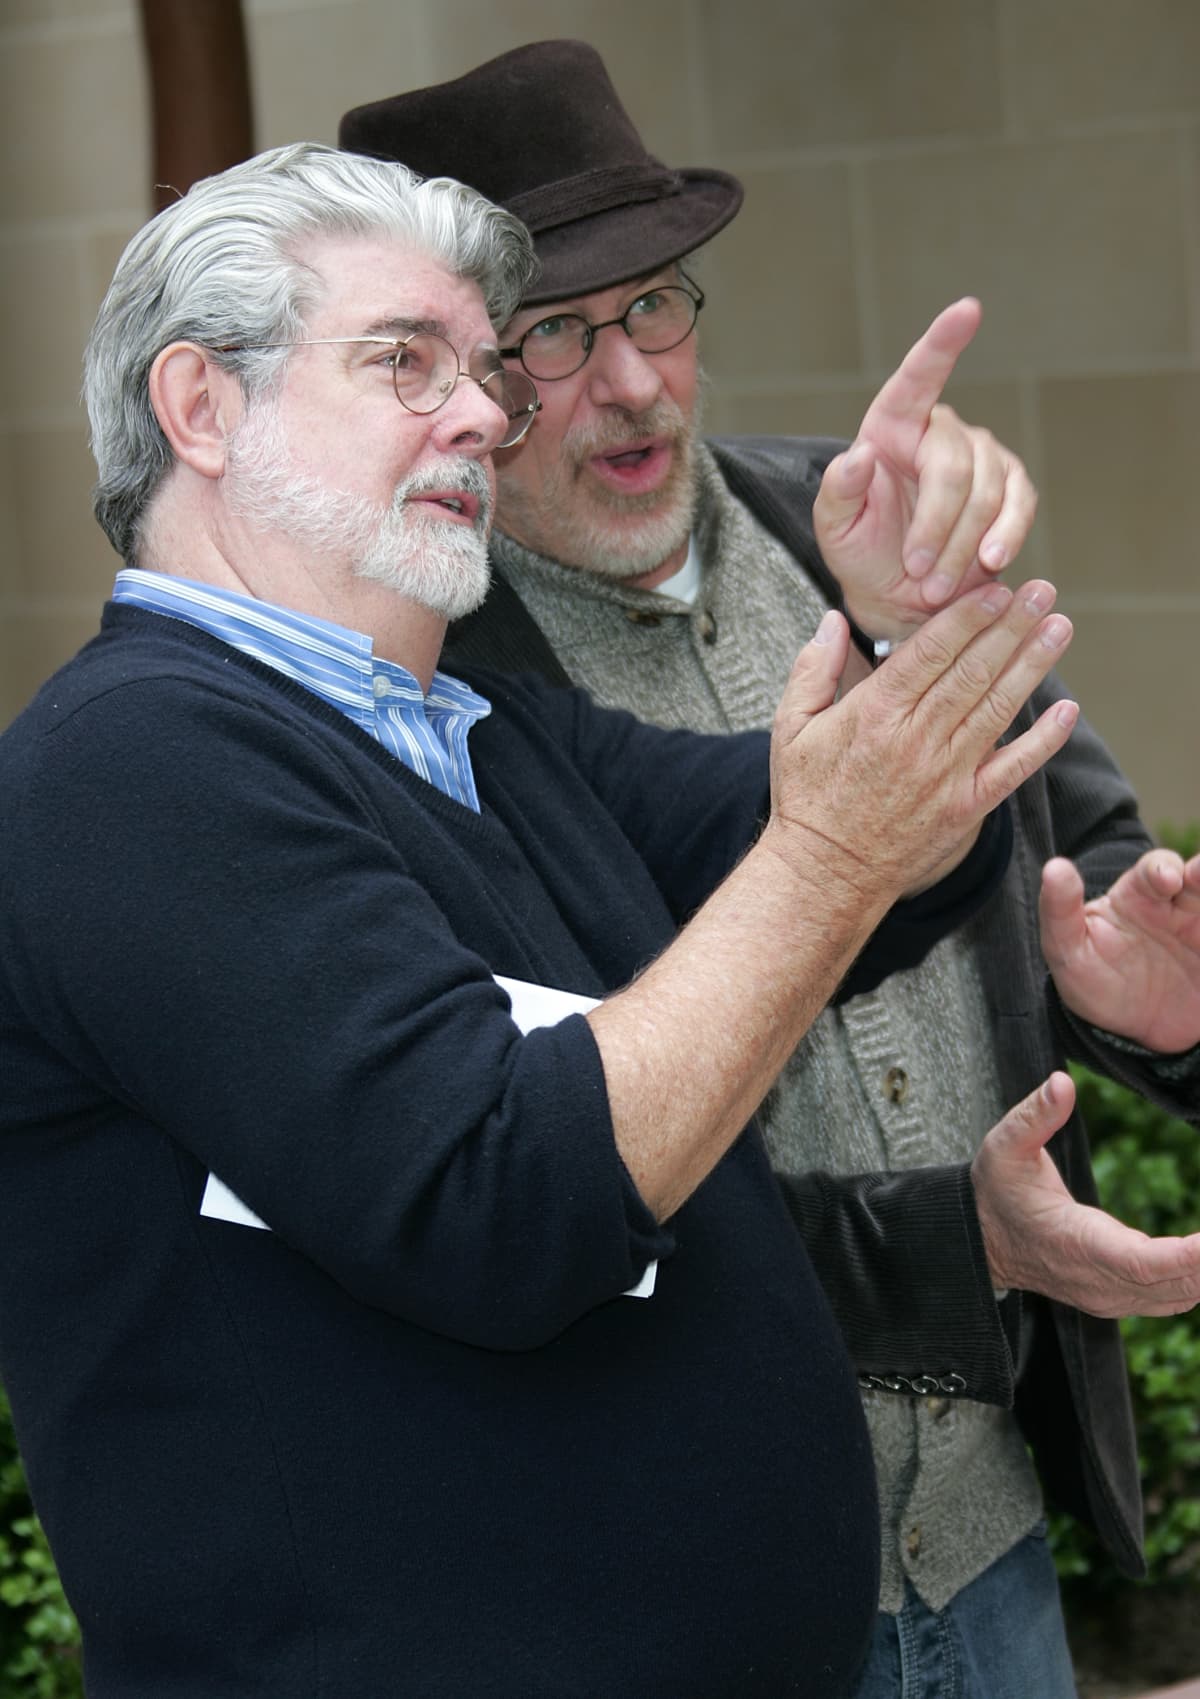 Steven Spielberg and George Lucas looking at something offscreen